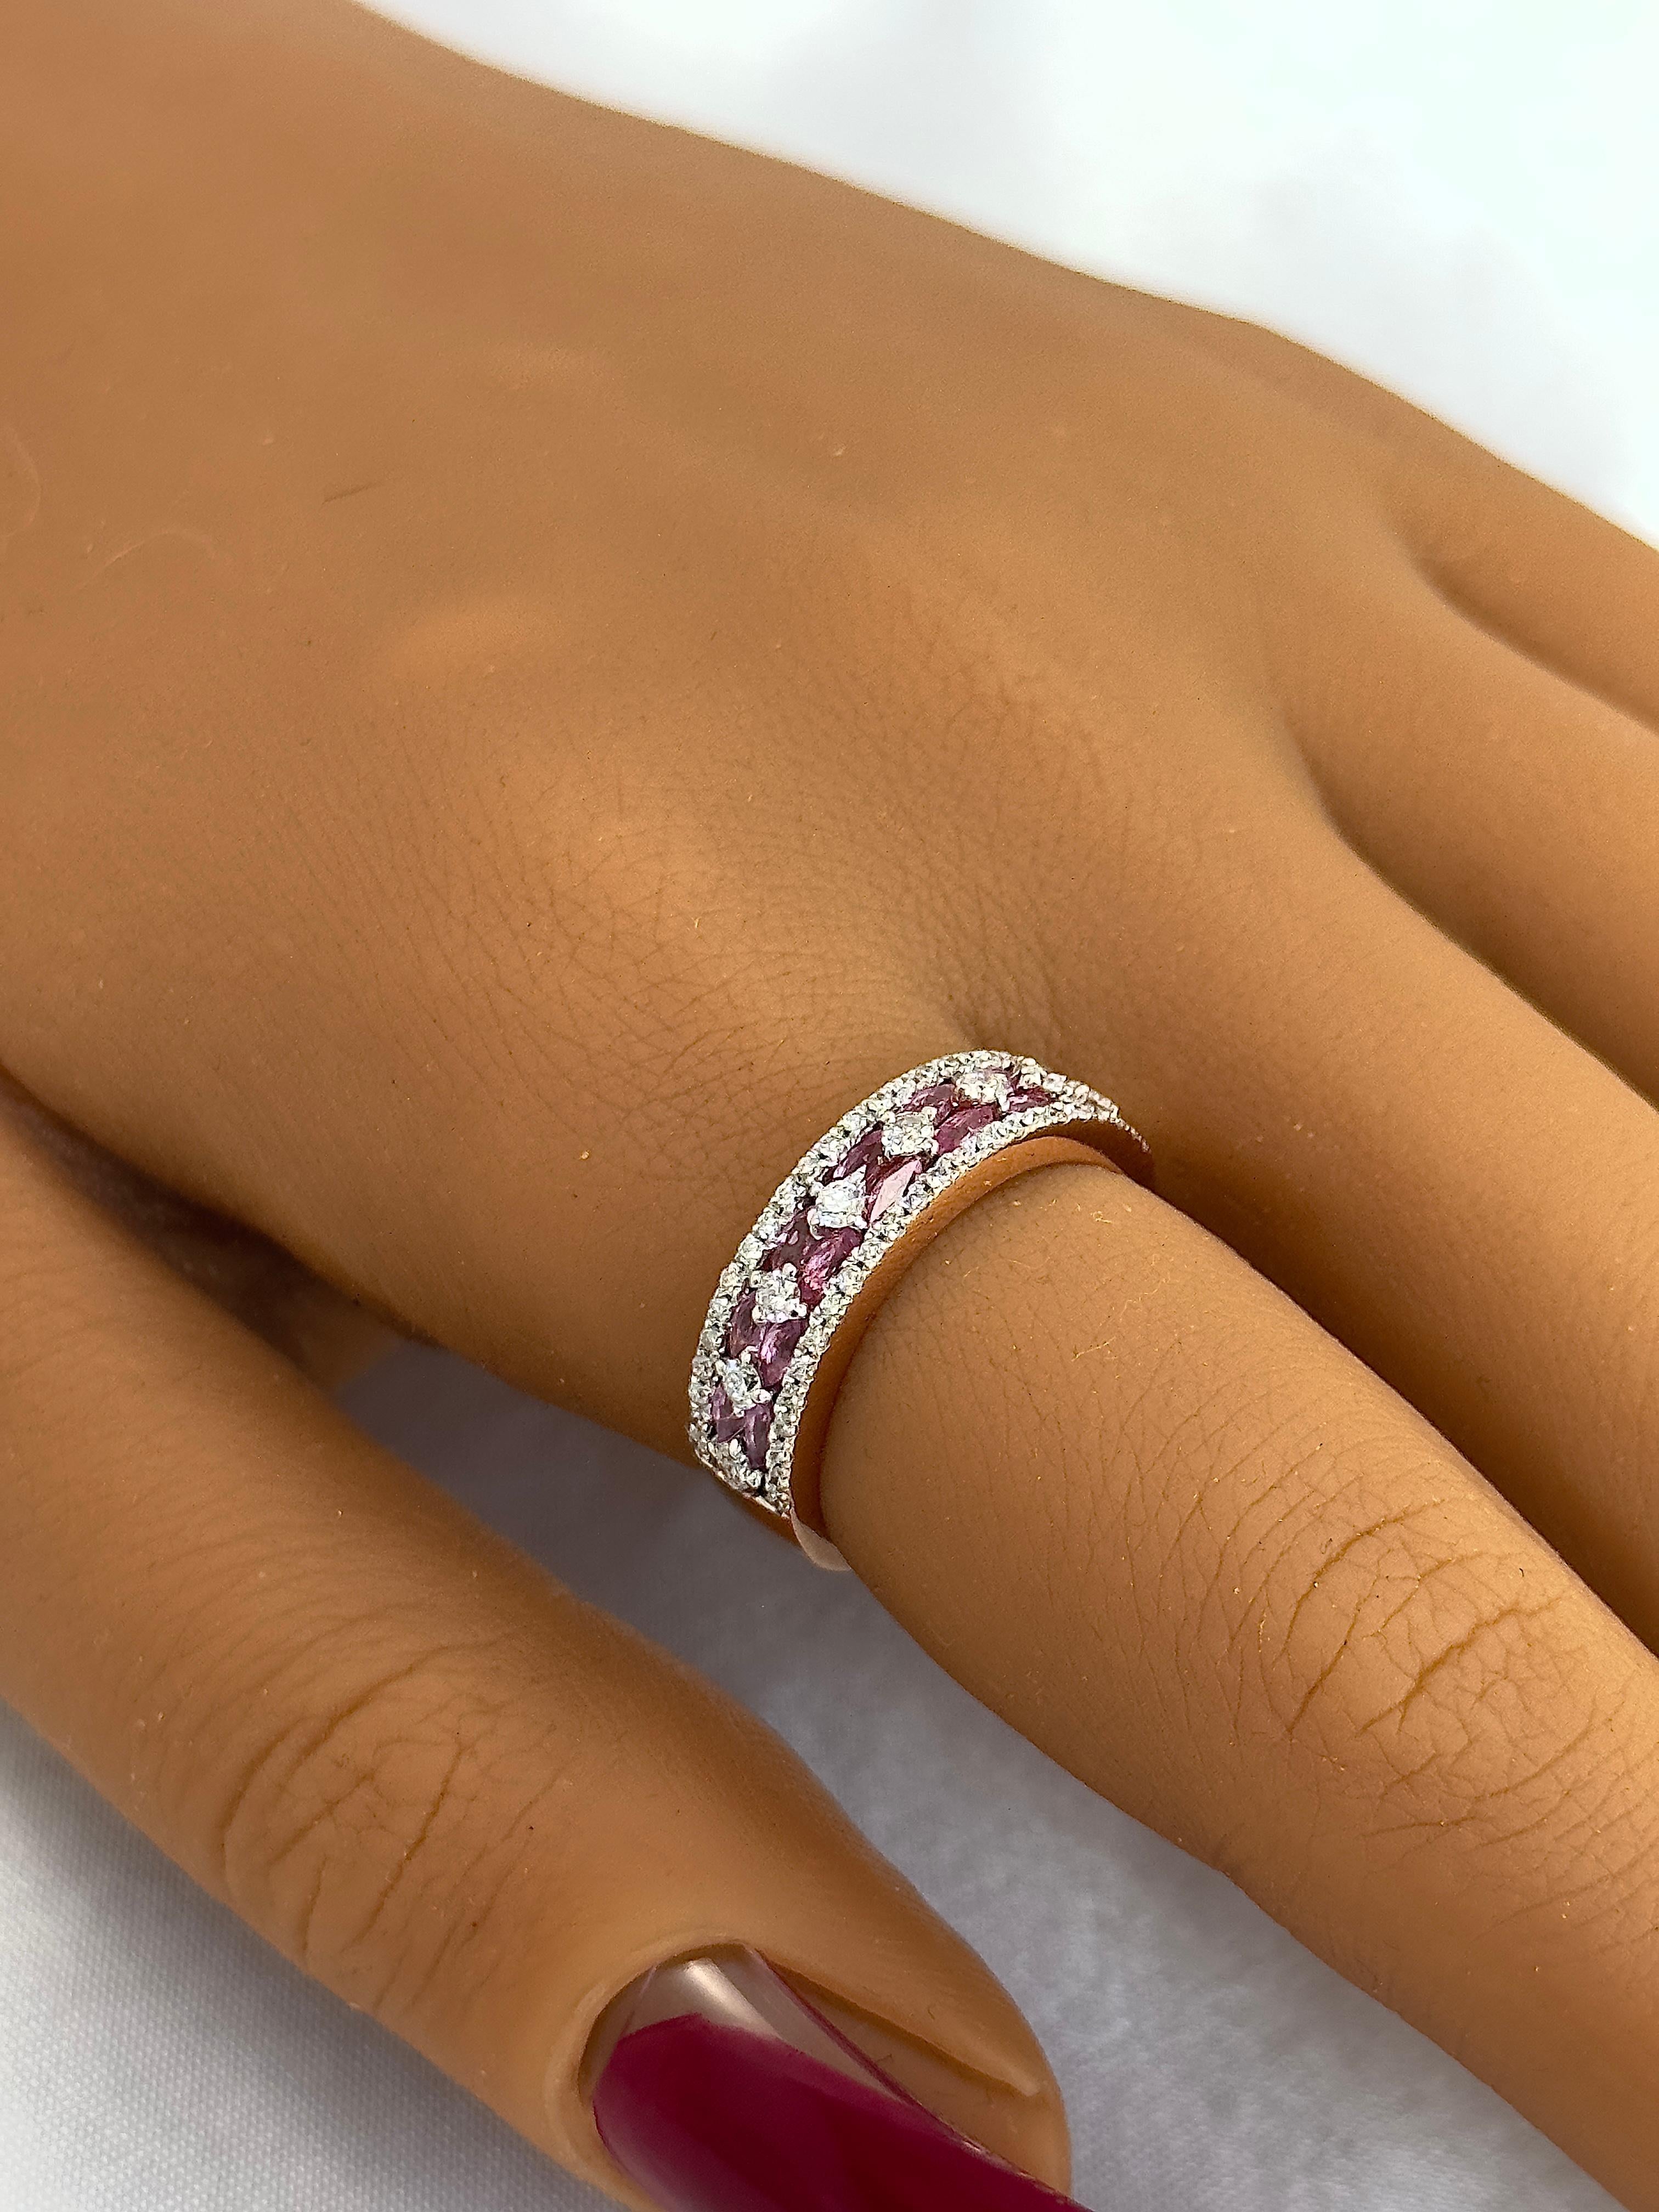 Pink sapphires and diamonds are back together! Marquise pink sapphires are set in two rows between white diamonds. There are eight round diamonds running through the center of the ring and smaller diamonds on the sides. The pink sapphire marquise